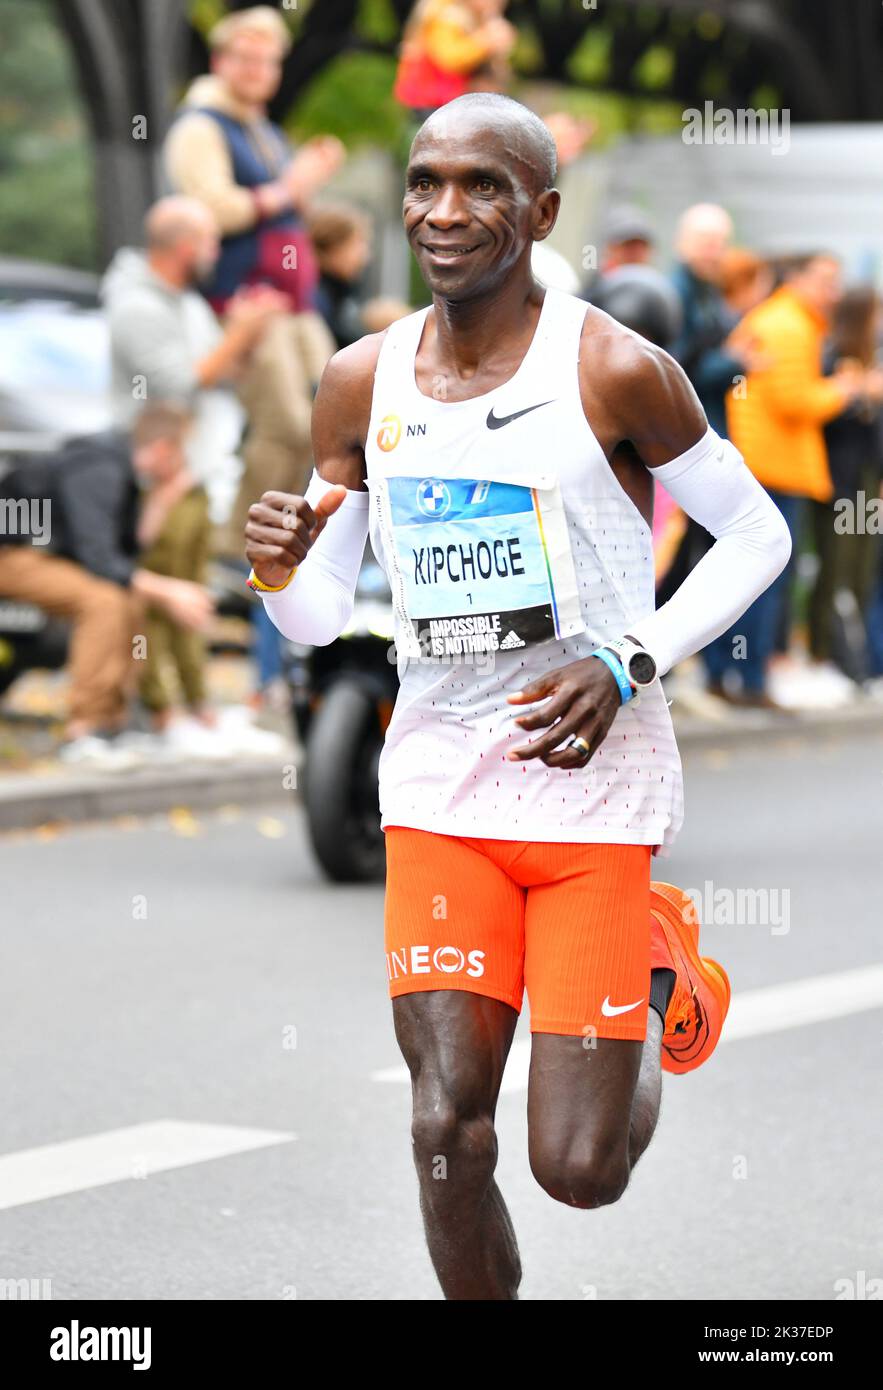 Berlin, Germany. 25th Sep, 2022. Gold medalist of the men's race, Eliud Kipchoge of Kenya, competes during the Berlin Marathon 2022 in Berlin, capital of Germany, Sept. 25, 2022. Credit: Ren Pengfei/Xinhua/Alamy Live News Stock Photo